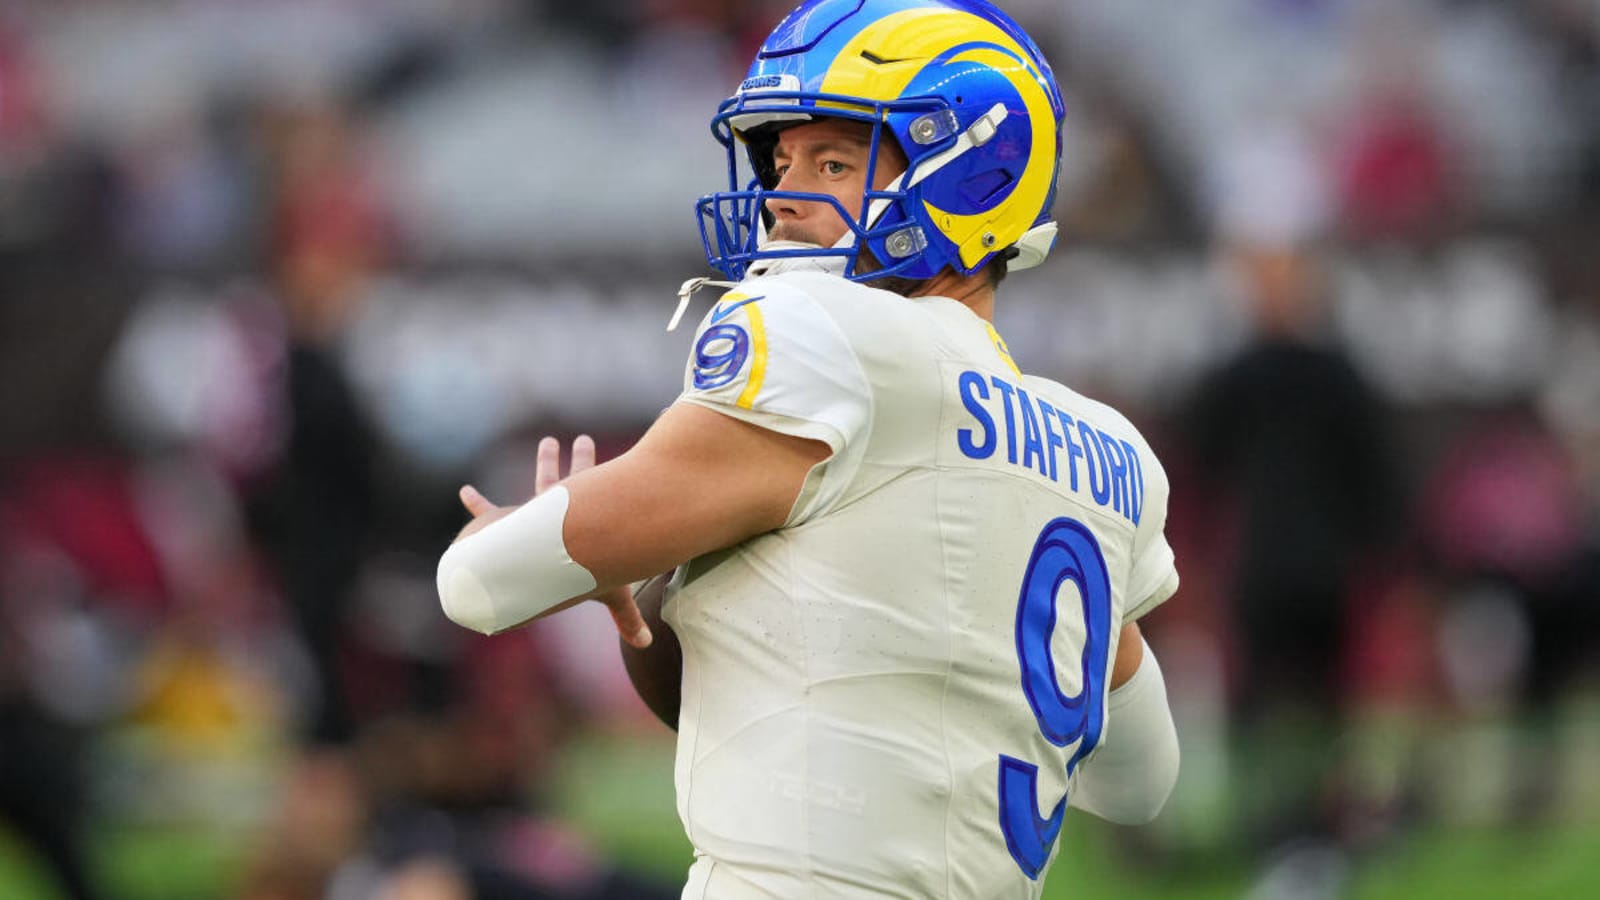 Matthew Stafford still ranked among elite QBs in most recent national rankings